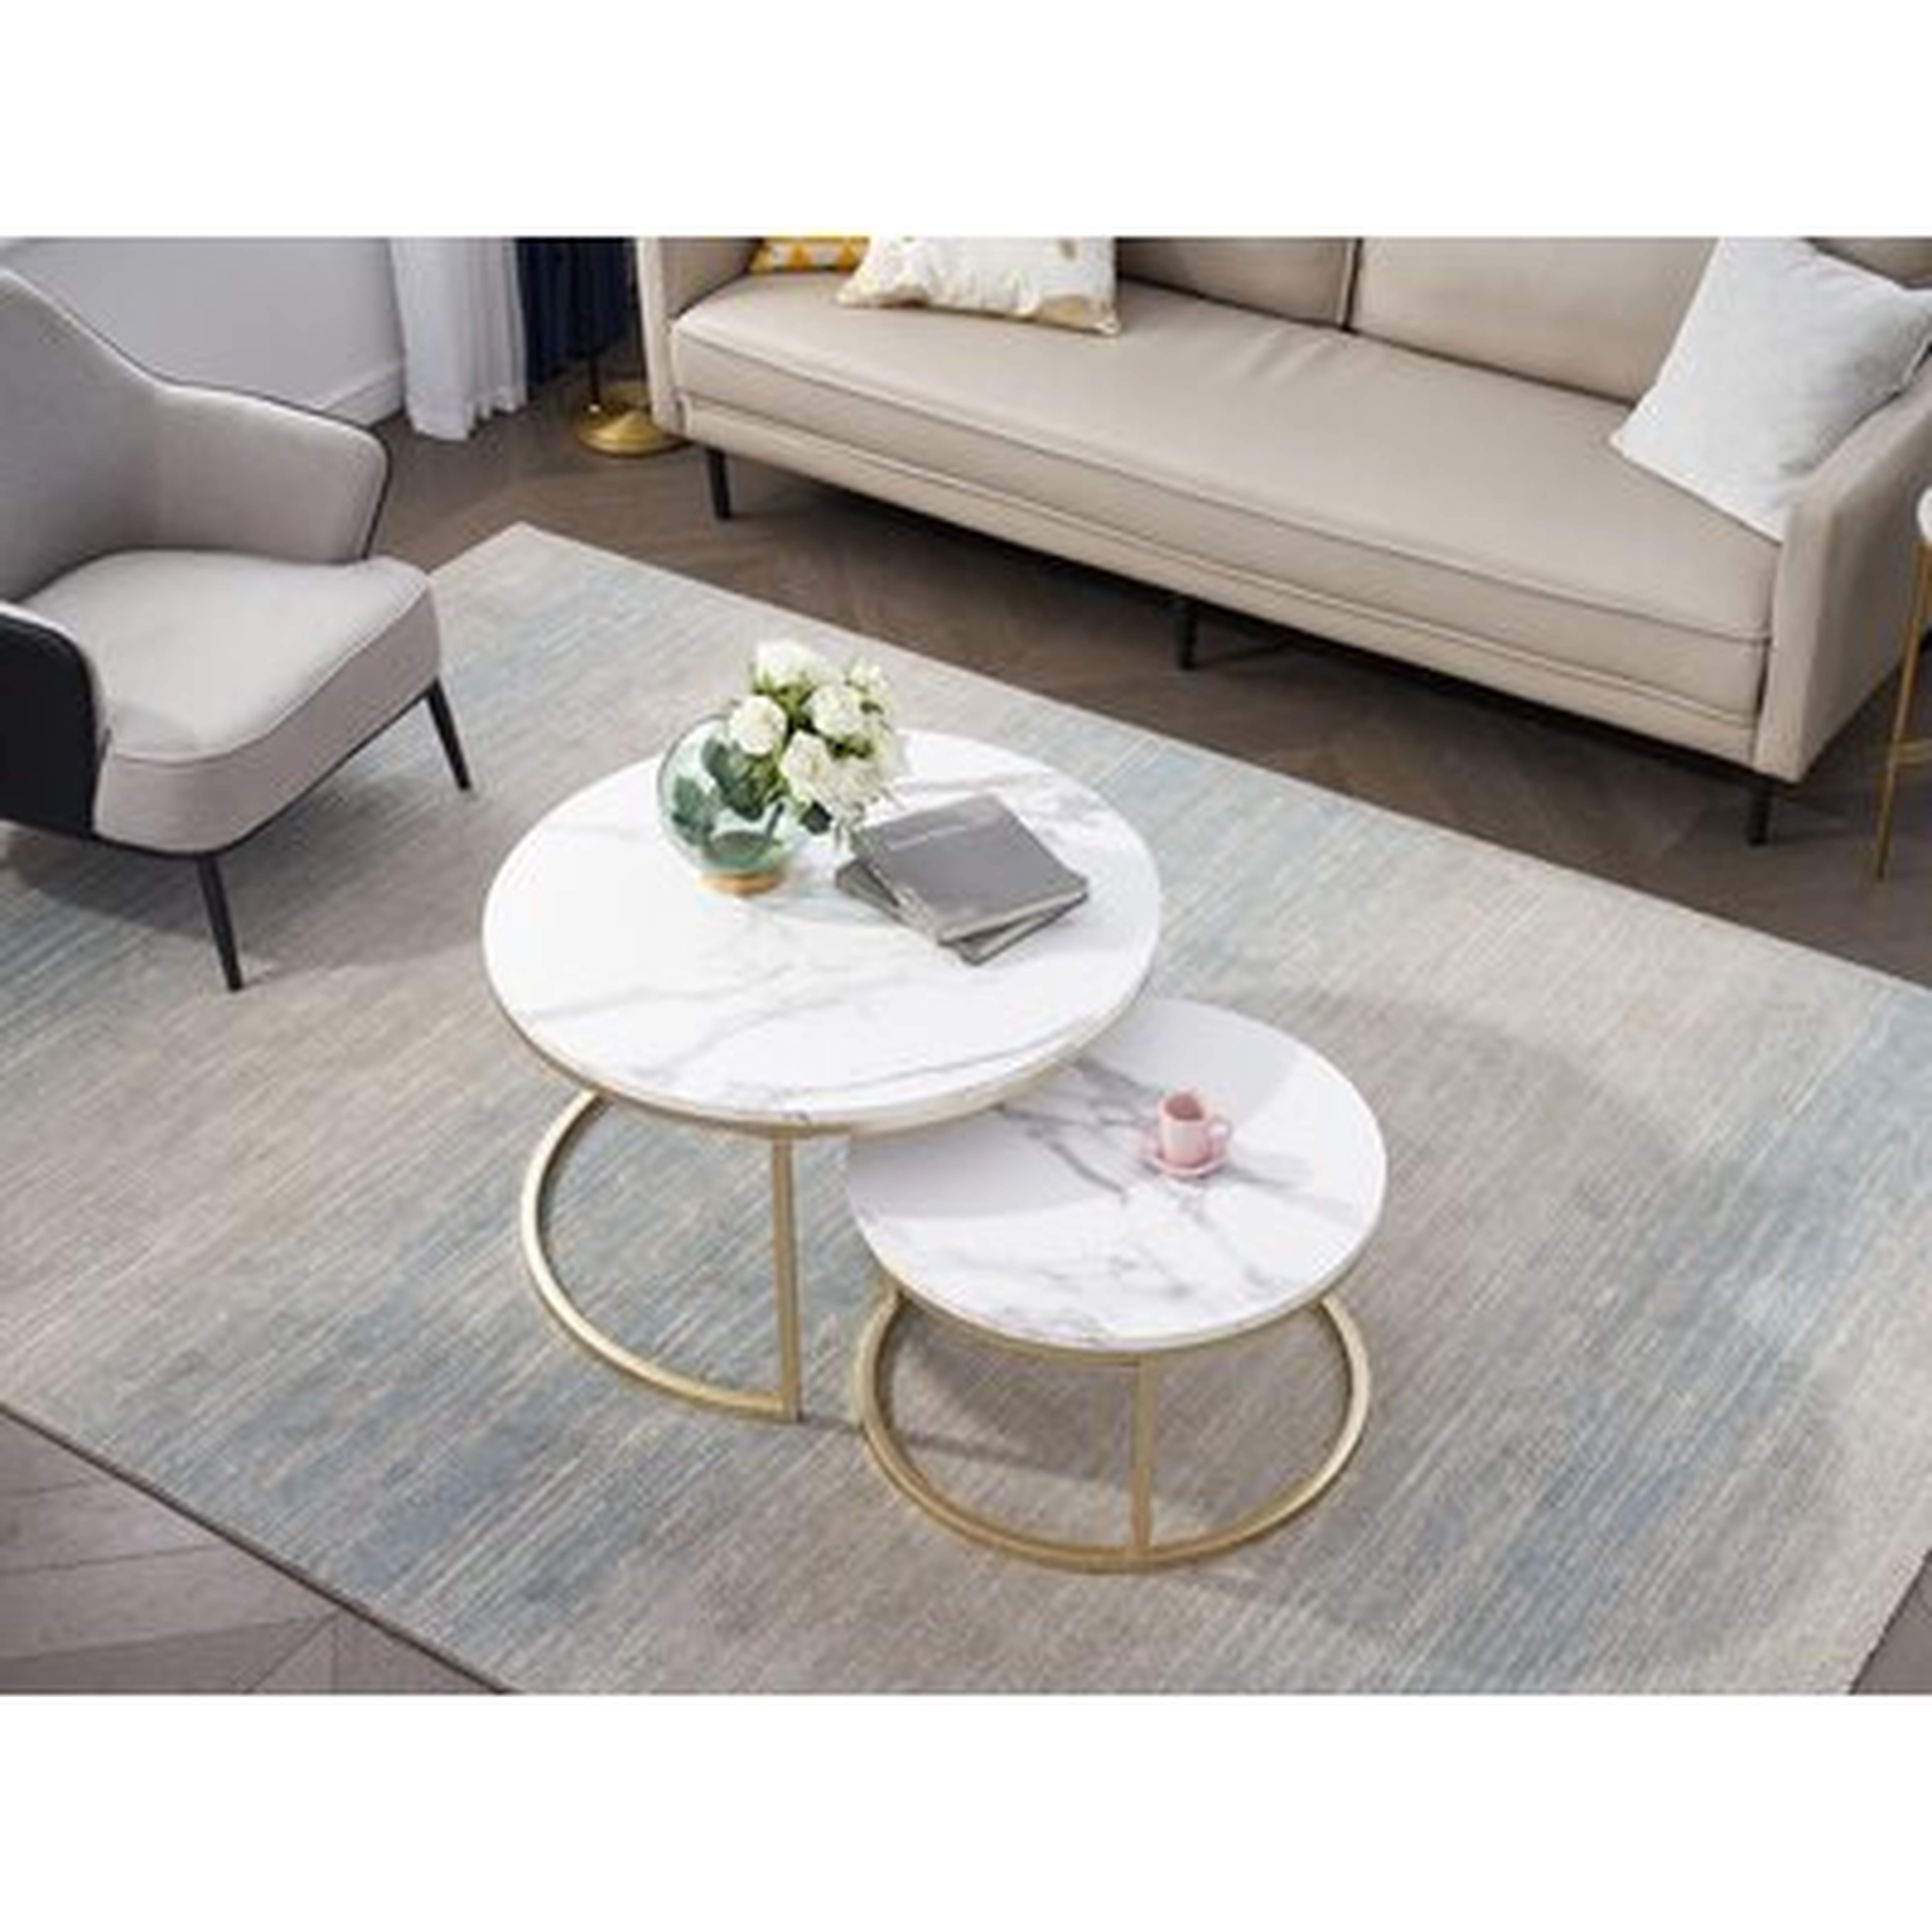 Space Saving 2 Round Nesting Coffee Tables With Heavy Steel Frame And Sleek Tabletop For Living Room, Set Of 2 - Wayfair